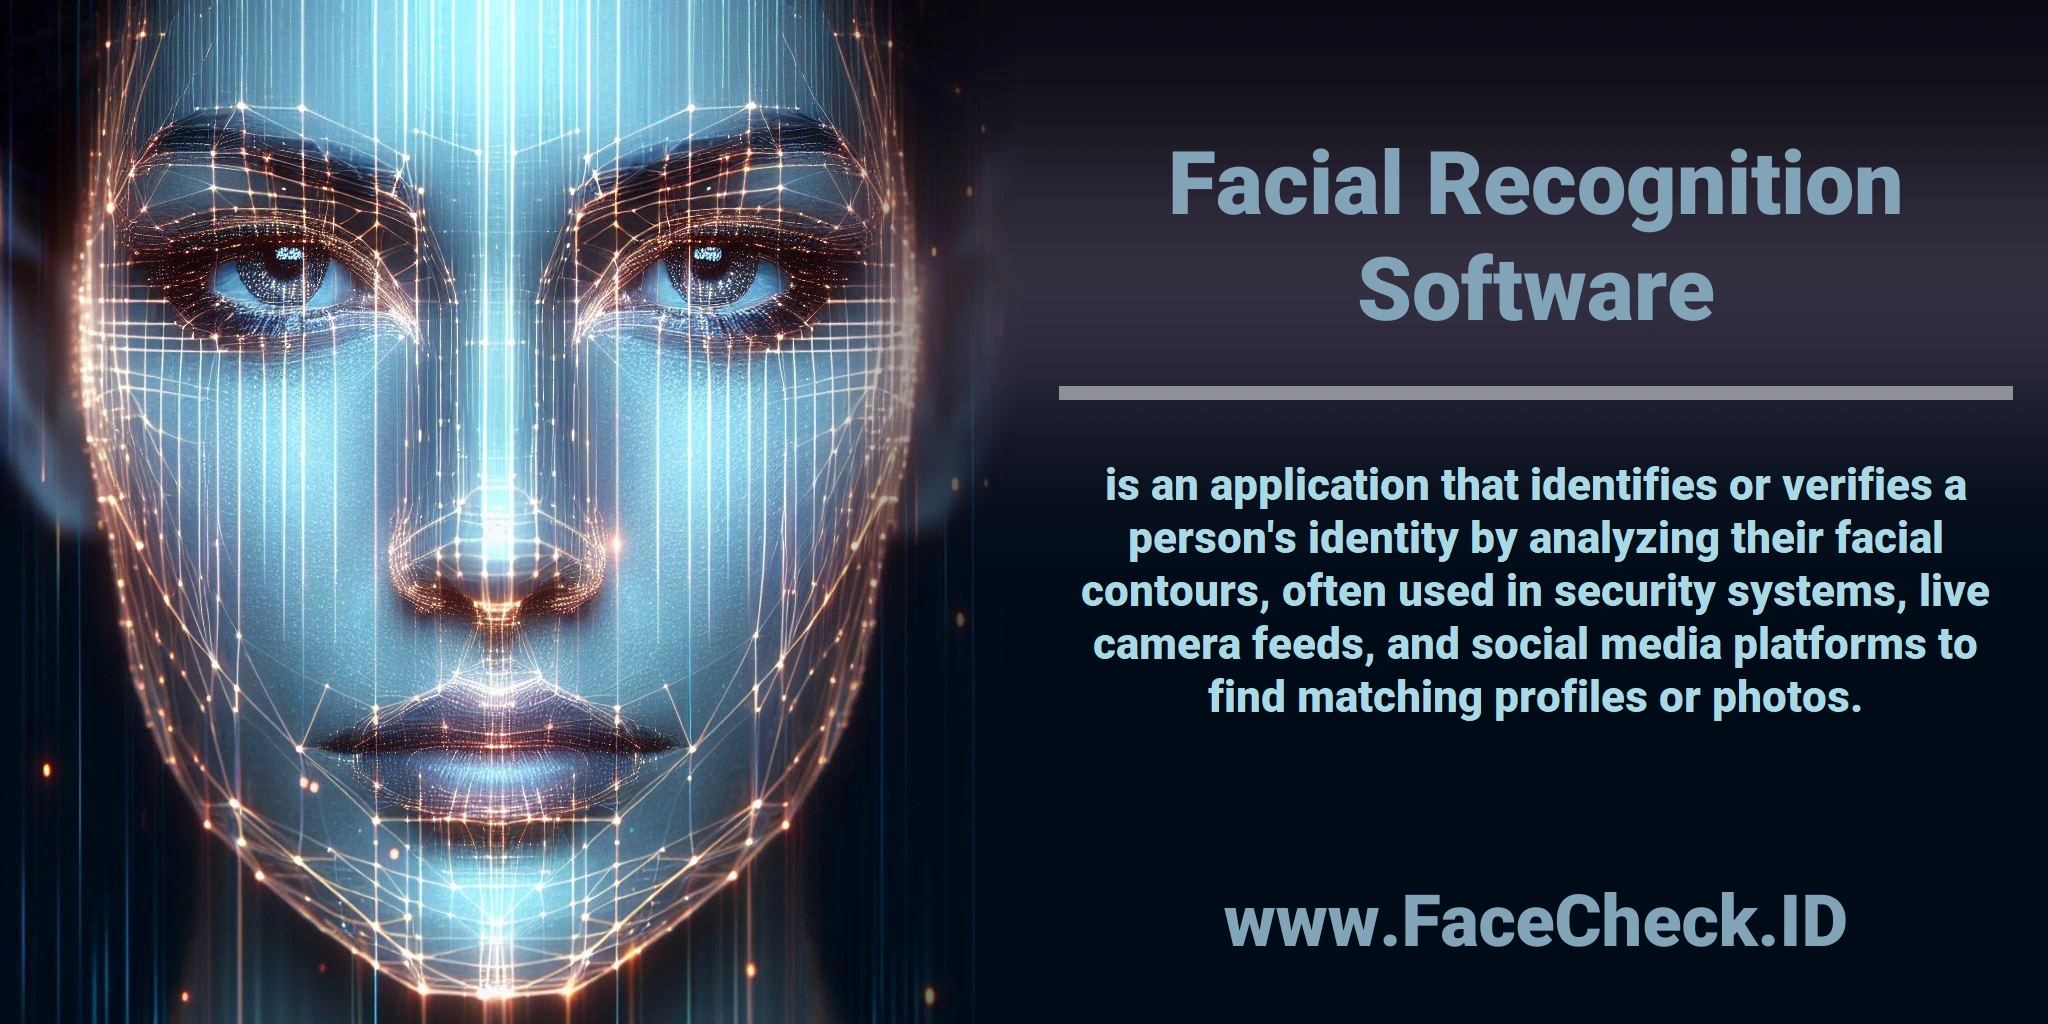 <b>Facial Recognition Software</b> is an application that identifies or verifies a person's identity by analyzing their facial contours, often used in security systems, live camera feeds, and social media platforms to find matching profiles or photos.